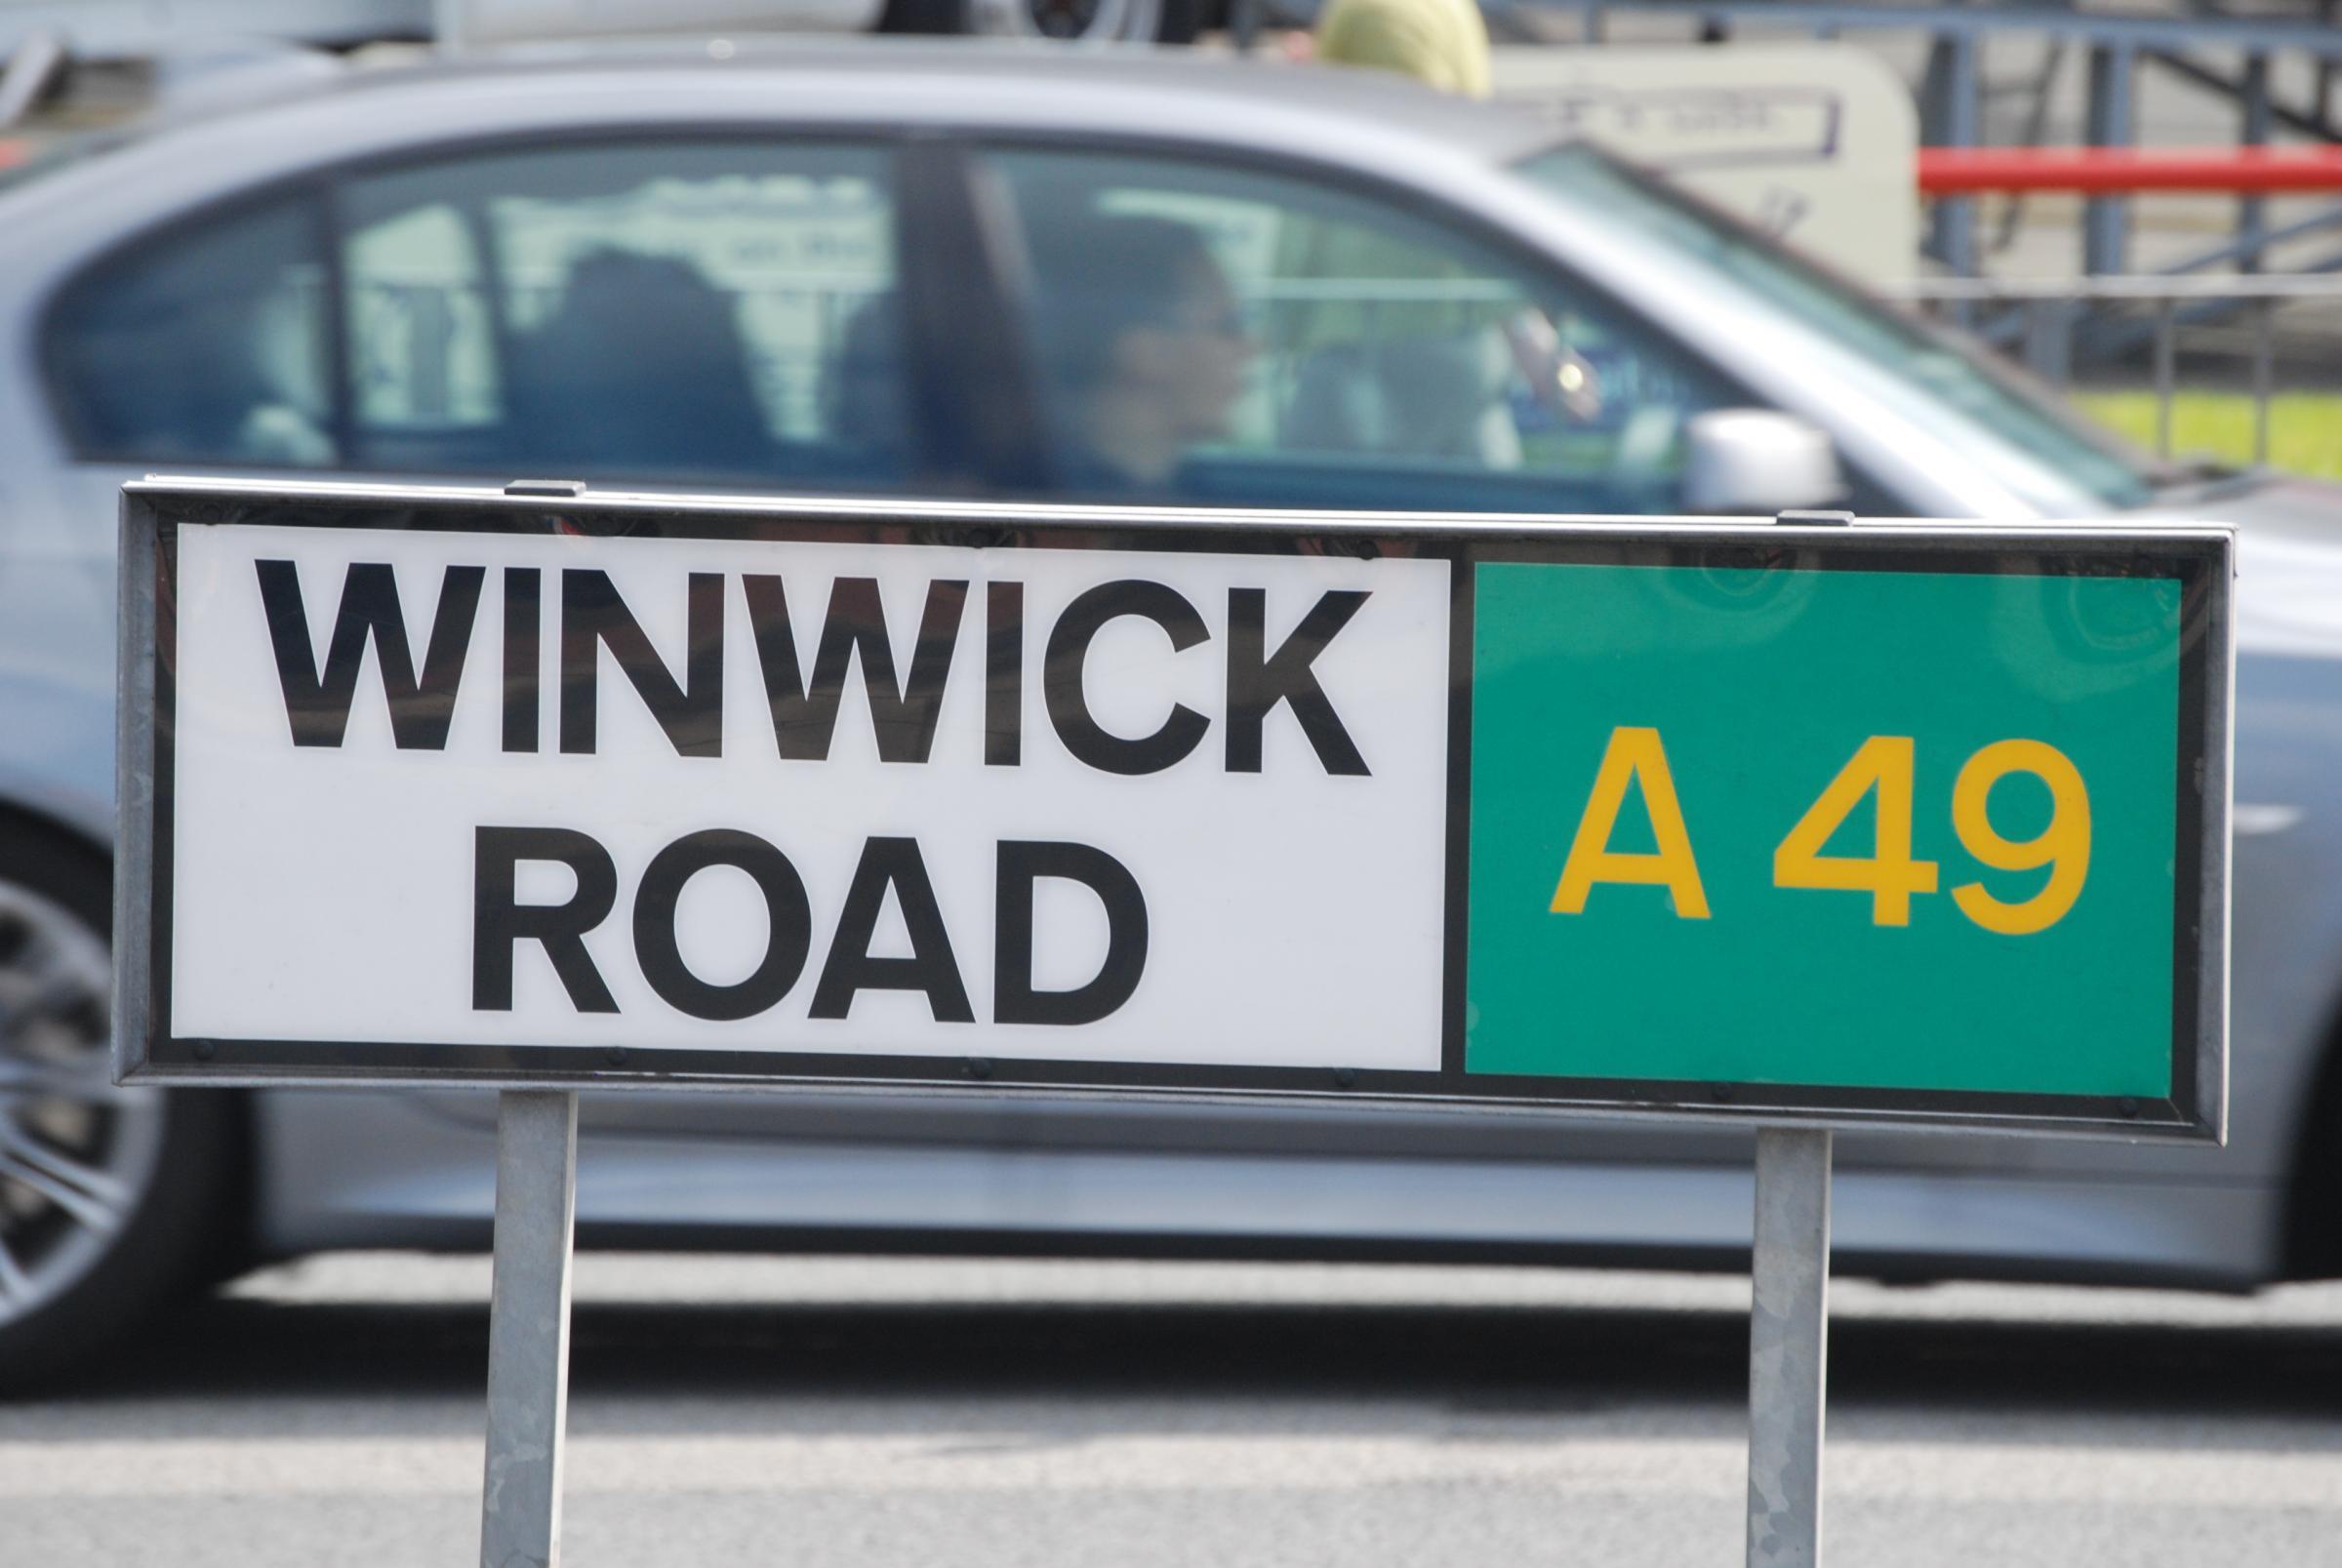 The driving was witnessed on Winwick Road in Warrington